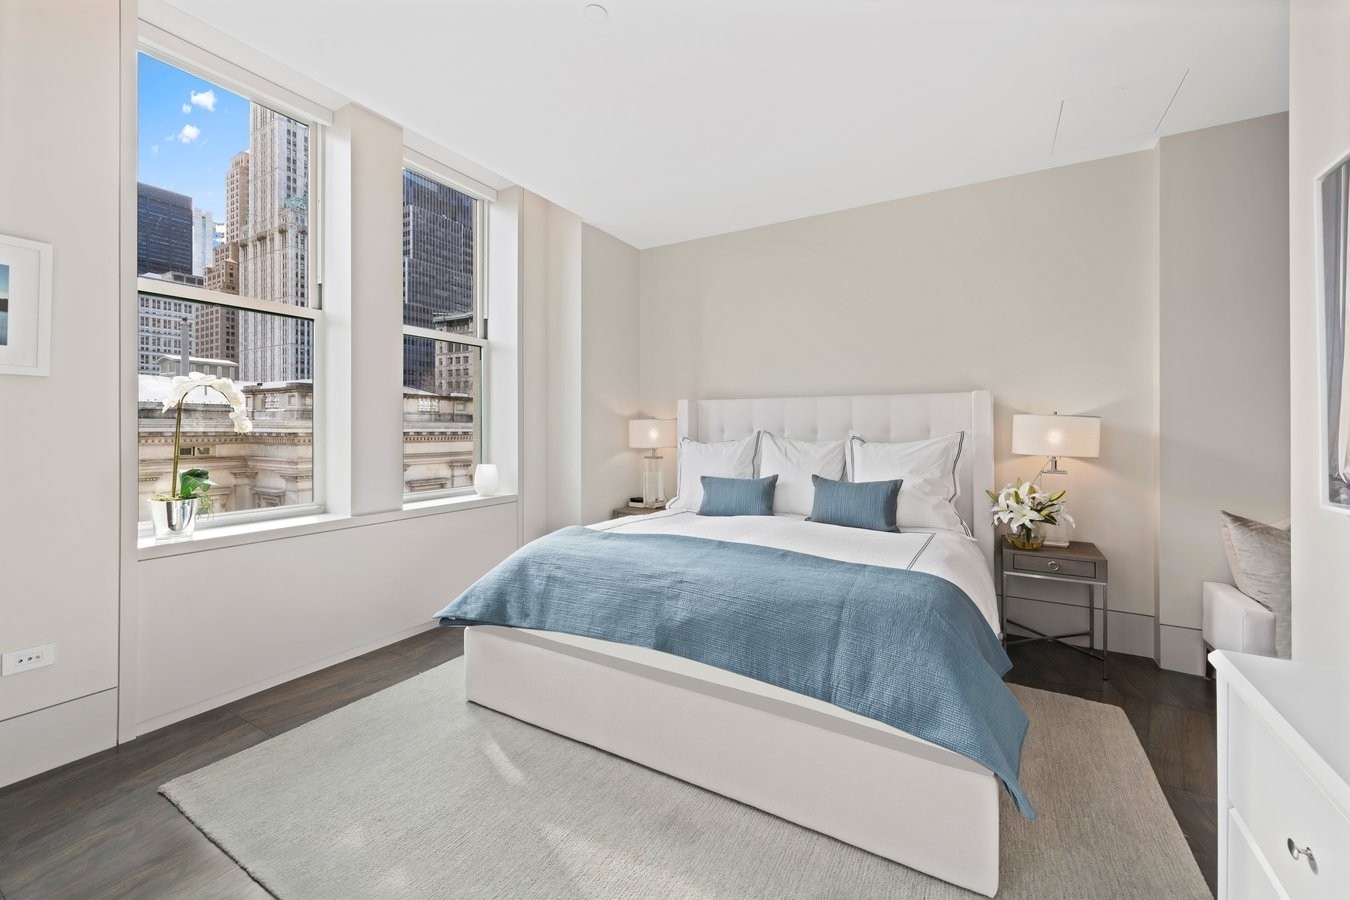 14. Condominiums for Sale at 49 CHAMBERS ST, 7D Civic Center, New York, New York 10007